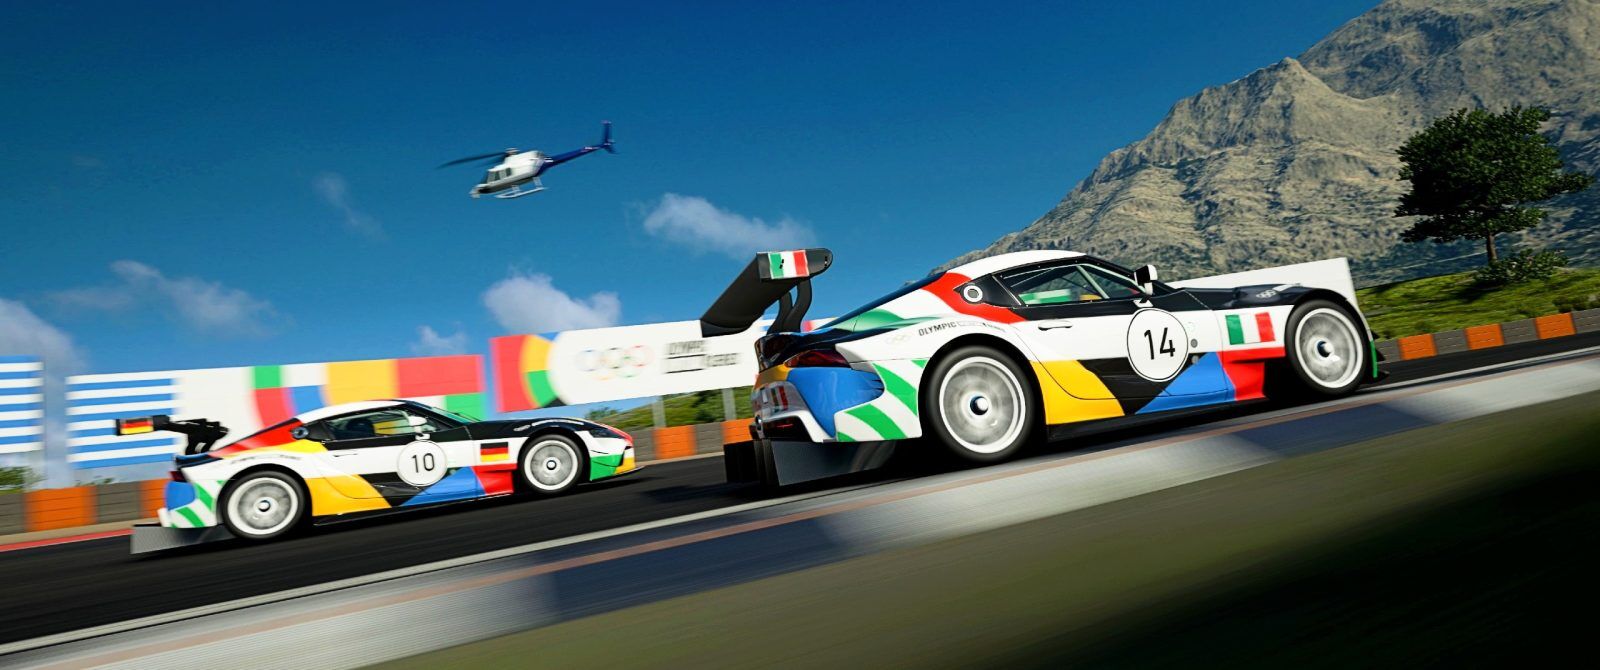 Two Toyota Supra racecars in Olympic colours, one with an Italian flag and one with a German flag.